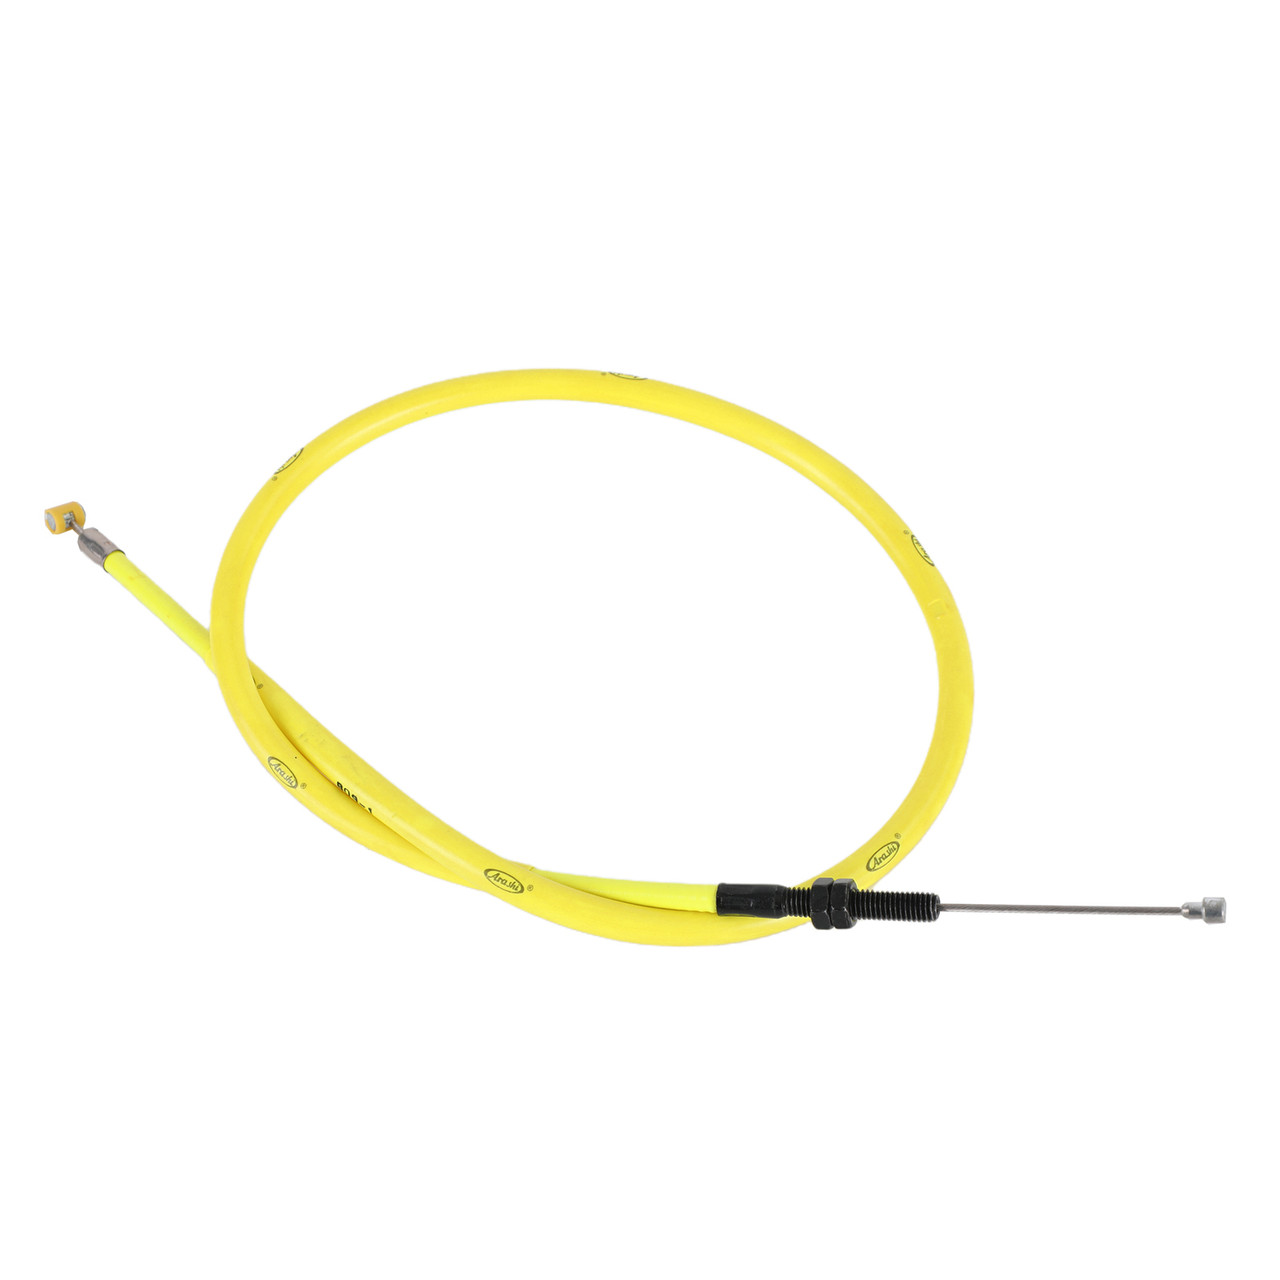 Clutch Cable Wire Fit for Yamaha YZF R3 2015-2020 Yellow